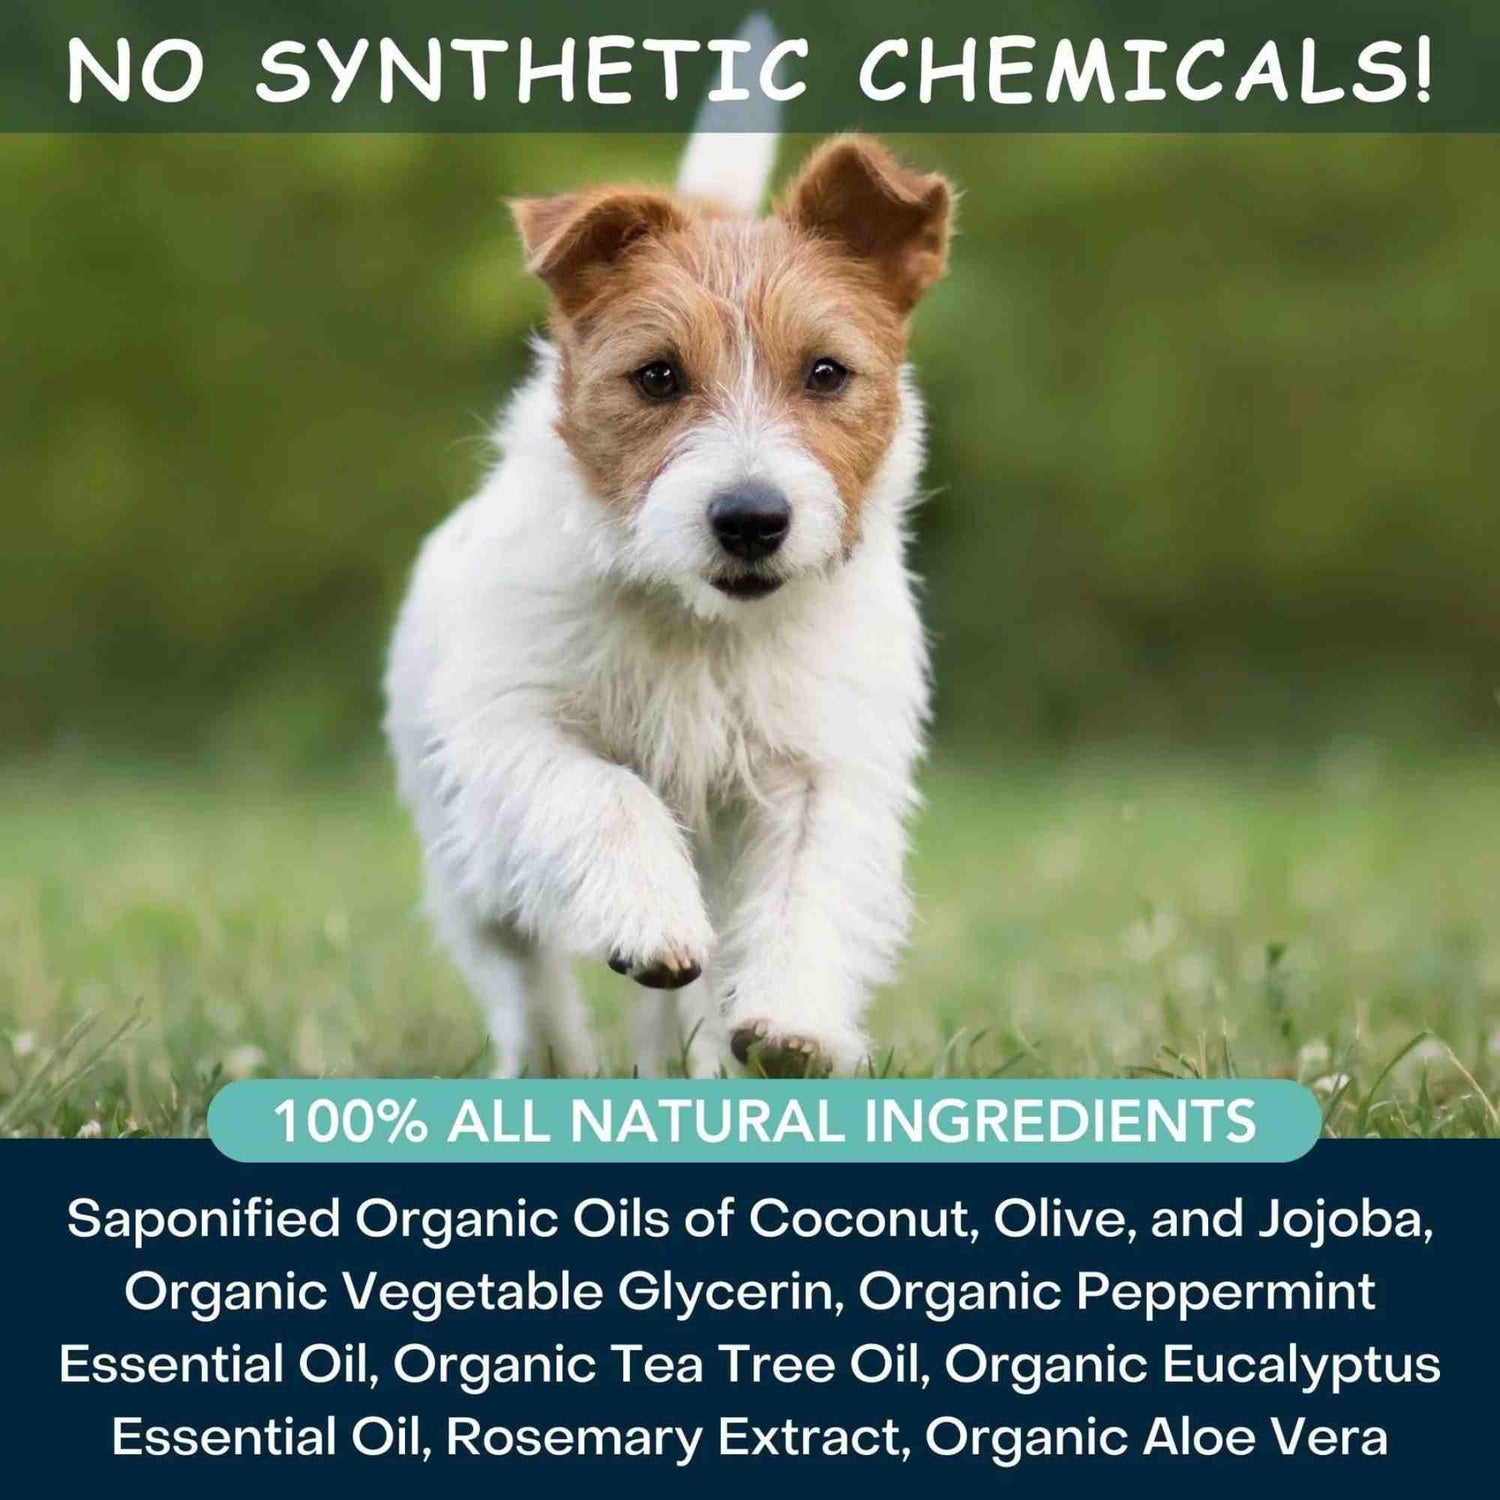 4-legger-usda-certified-organic-dog-shampoo-cooling-organic-tea-tree-oil-dog-shampoo-with-peppermint-ingredient list with no synthetics